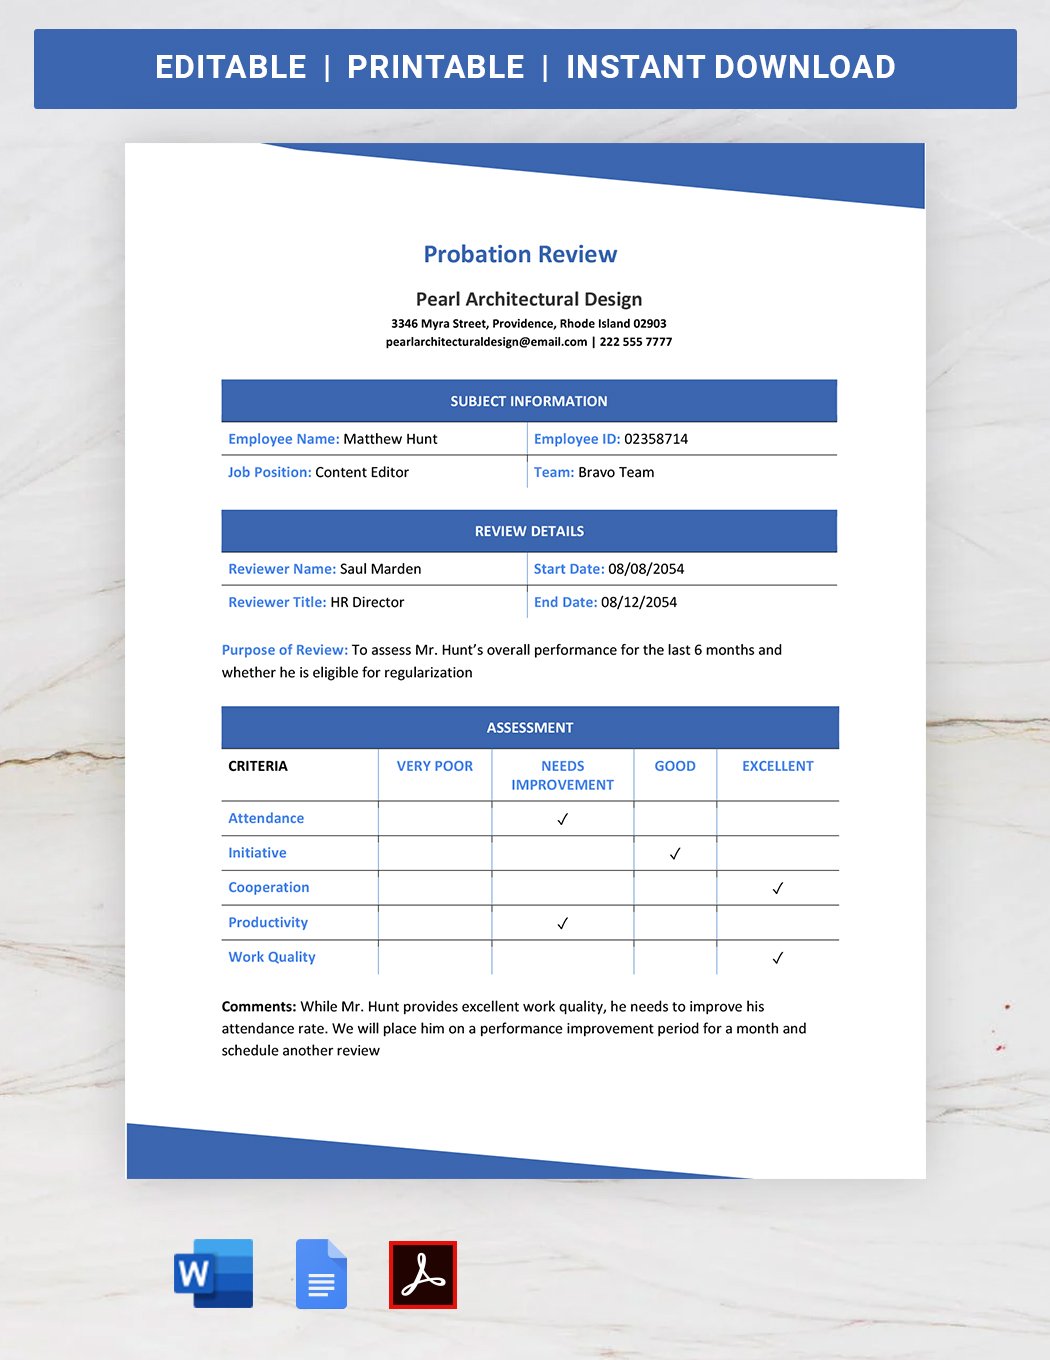 Free Probation Review Template in Word, Google Docs